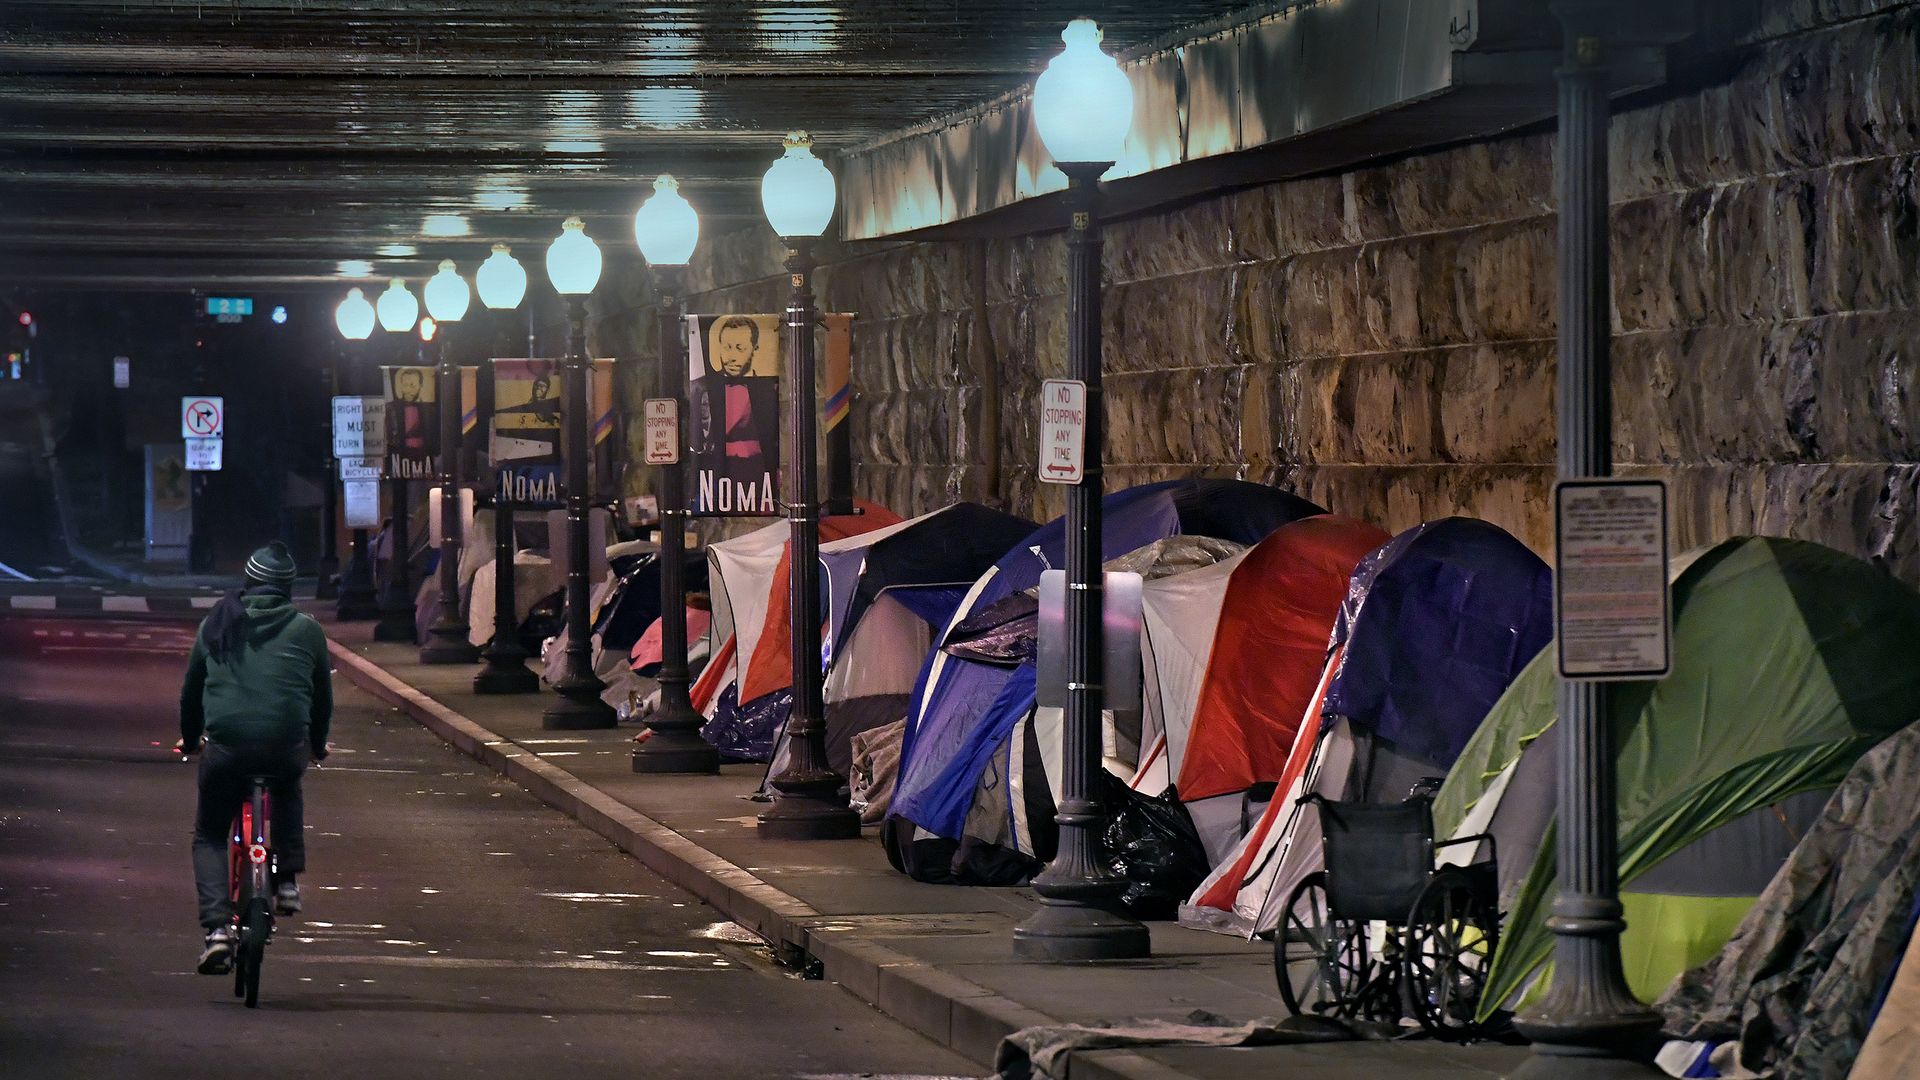 Tents for homeless people a street under an overpass in D.C.